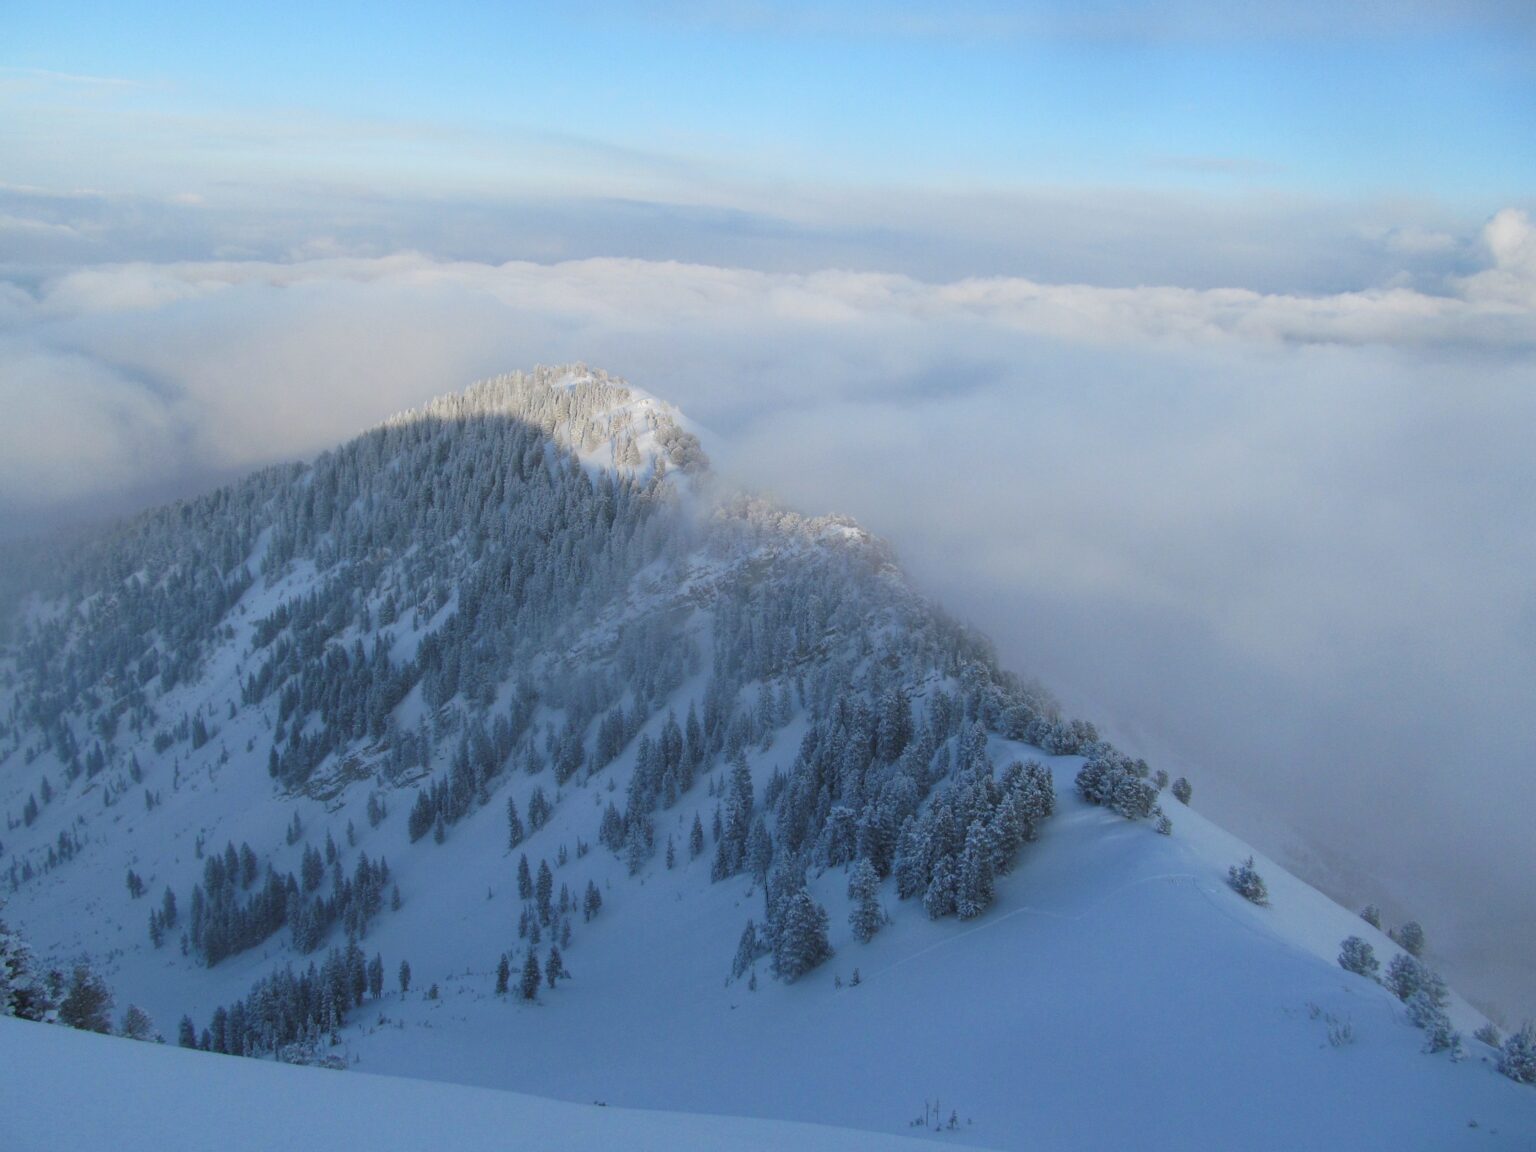 Looking at an inversion within the Wasatch Mountains while near the summit of Gobblers Knob